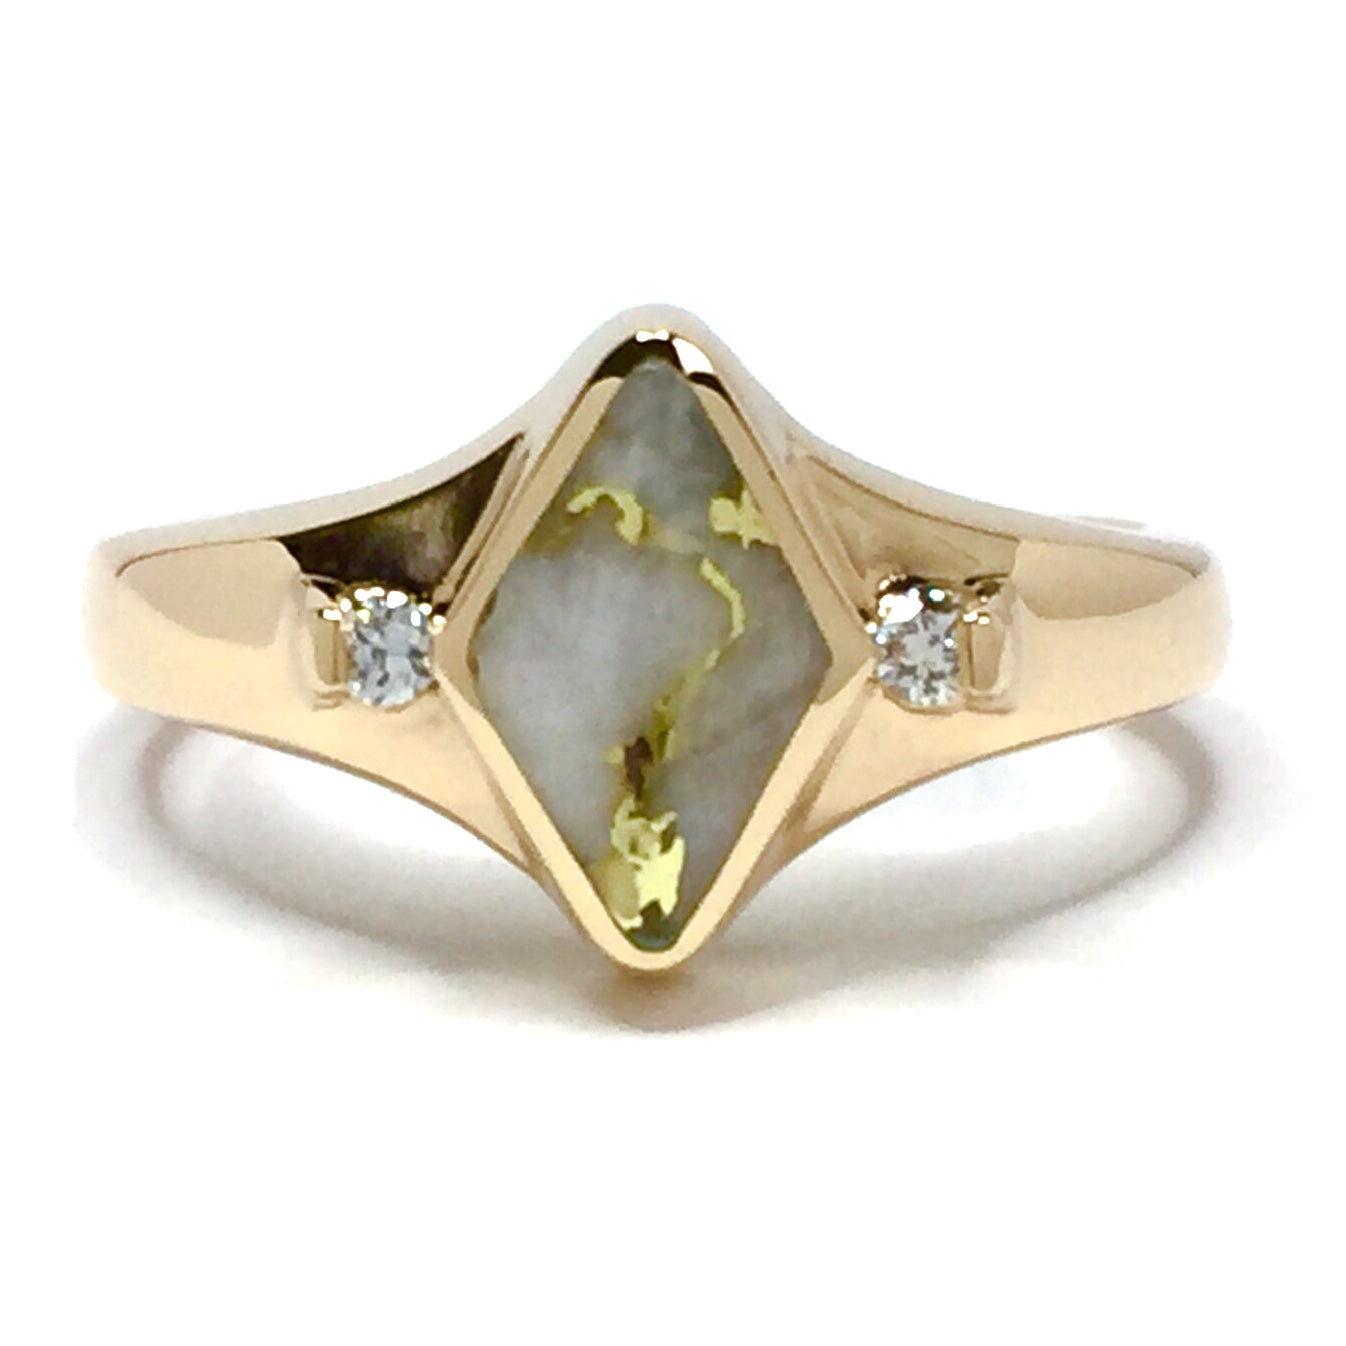 Share more than 201 yellow quartz ring best